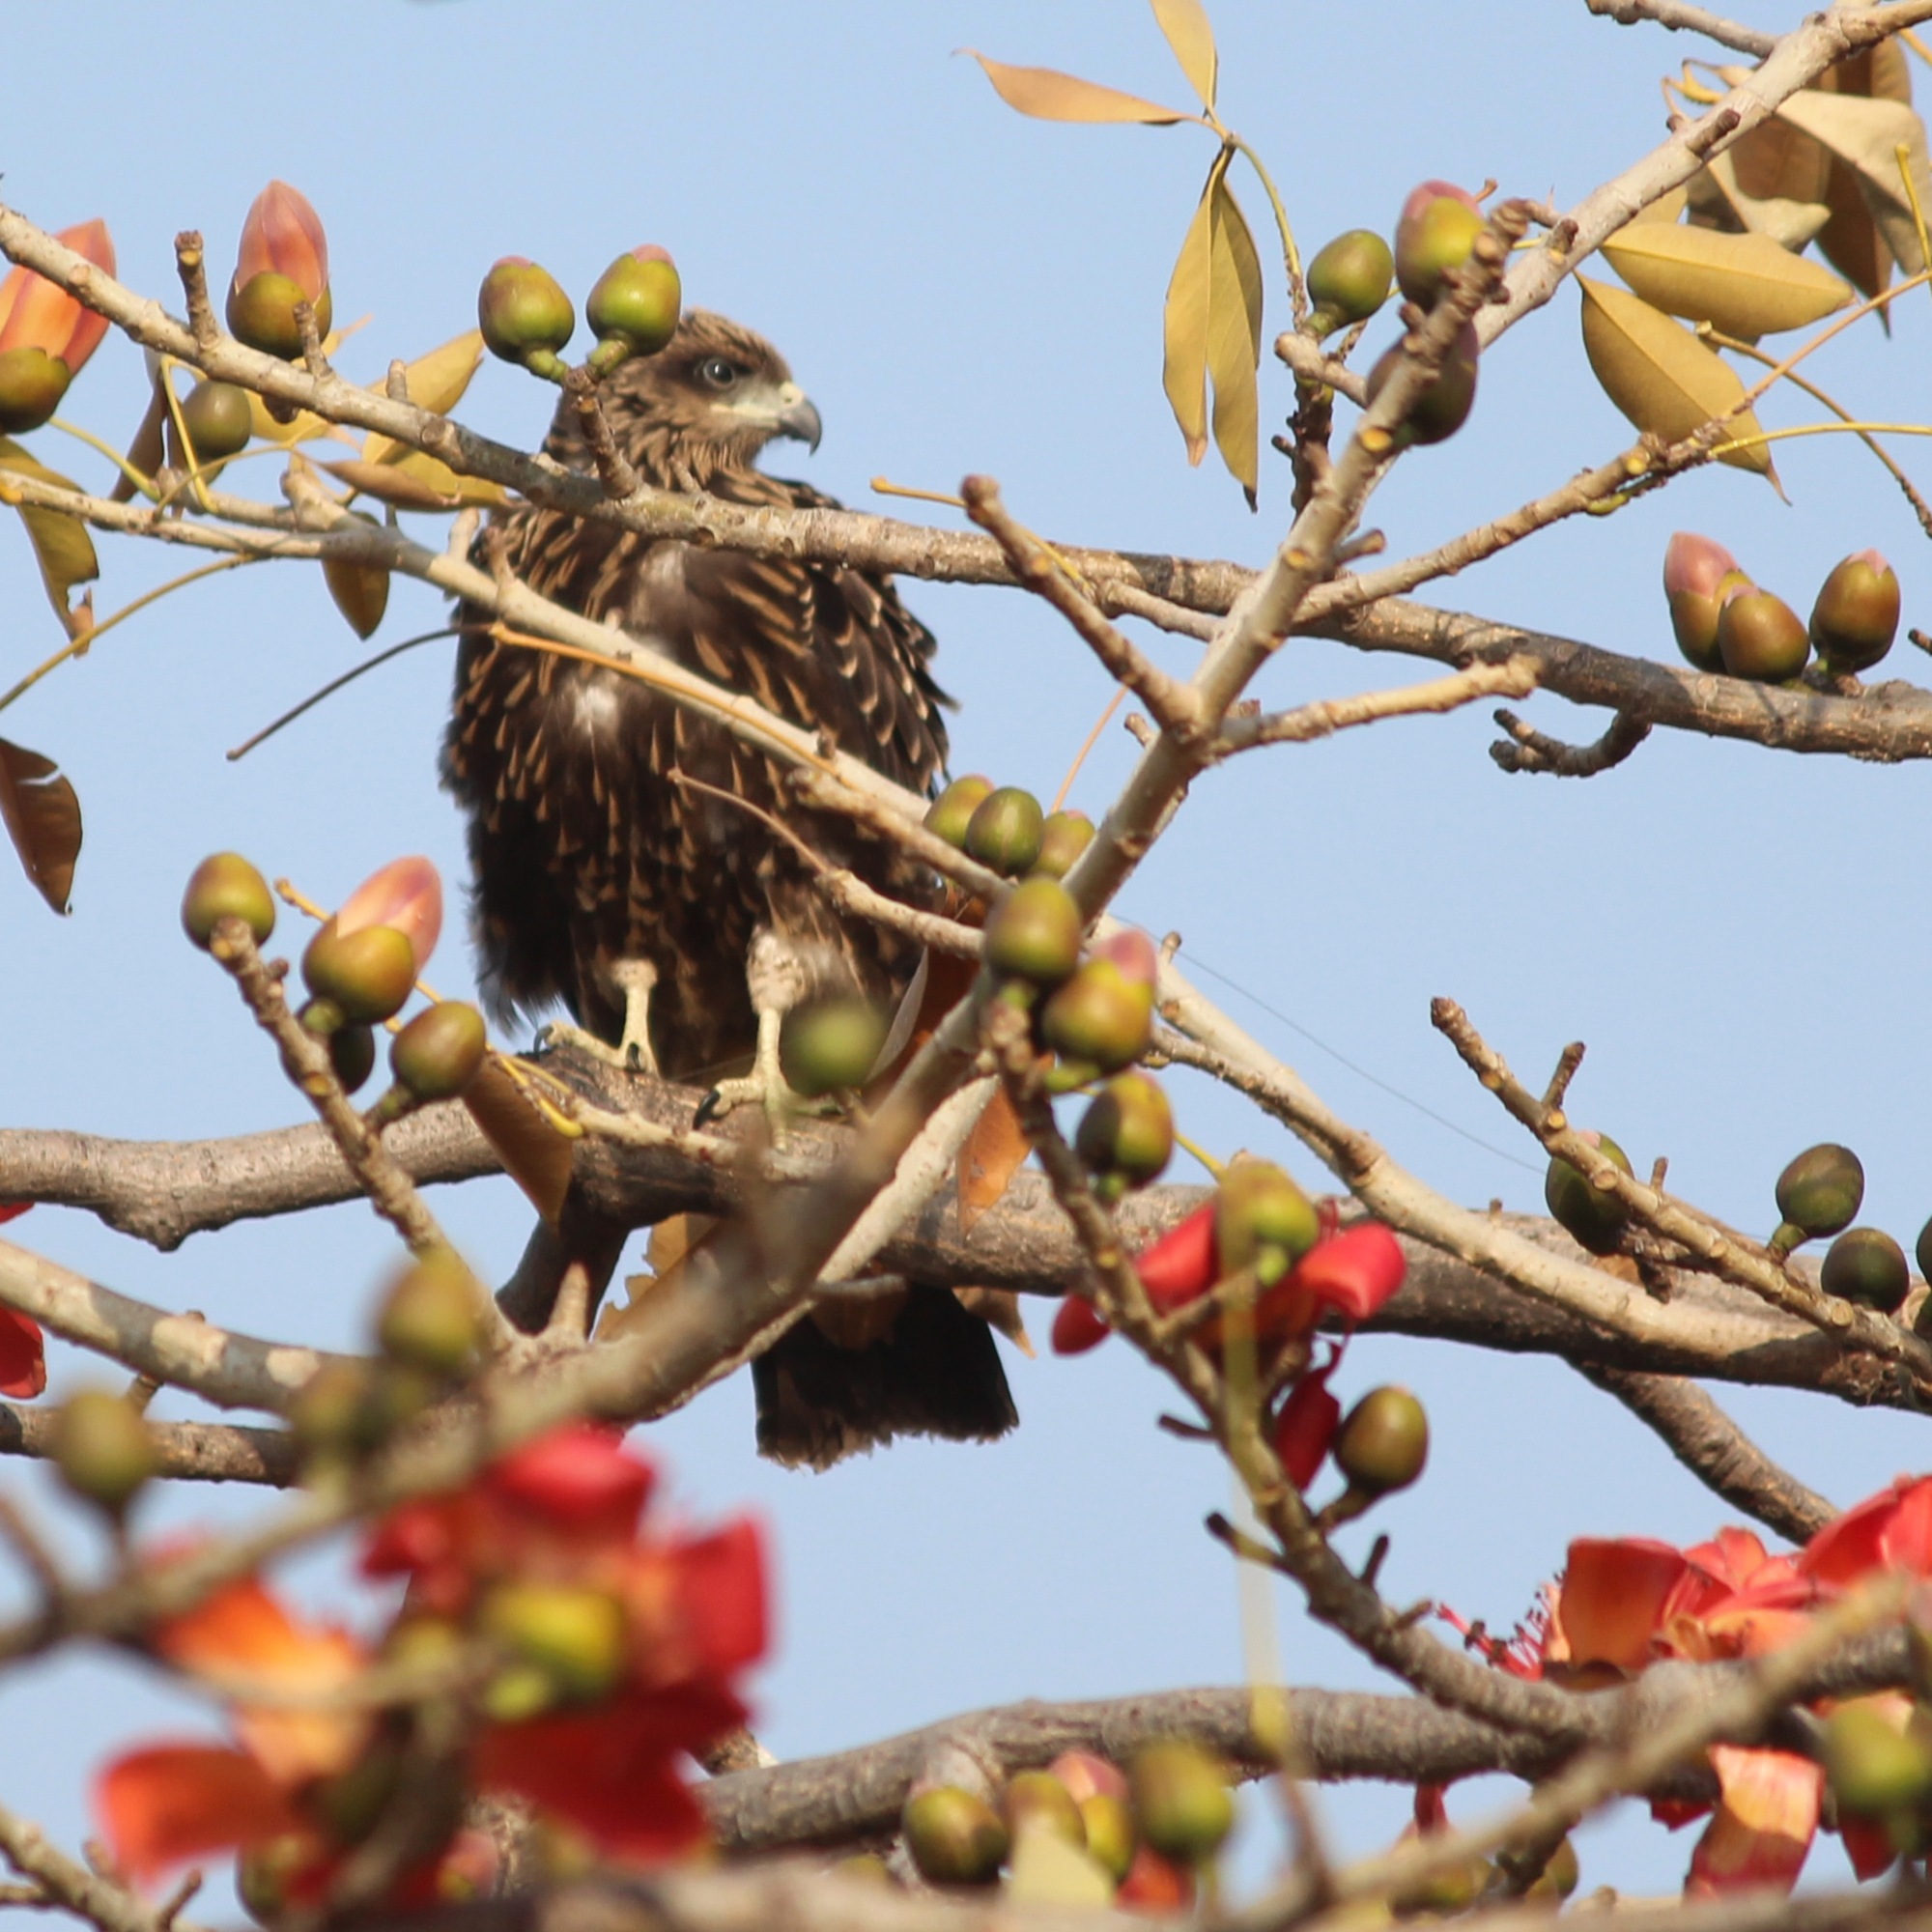 A young eagle perched on a tree